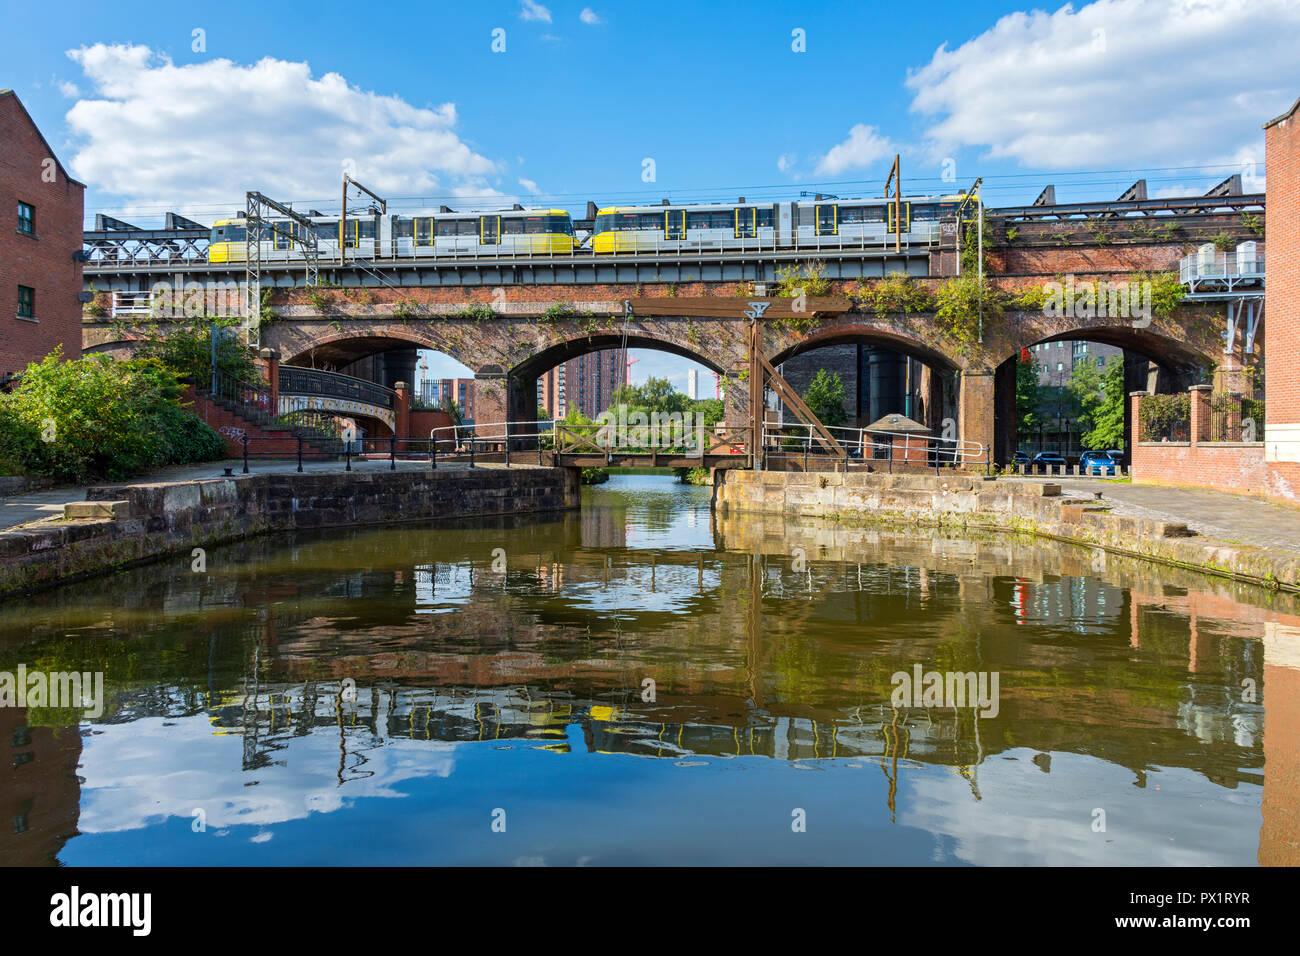 Metrolink tram on a Victorian railway viaduct, and a modern footbridge at Slate Wharf on the Bridgewater Canal at Castlefield, Manchester, England, UK Stock Photo